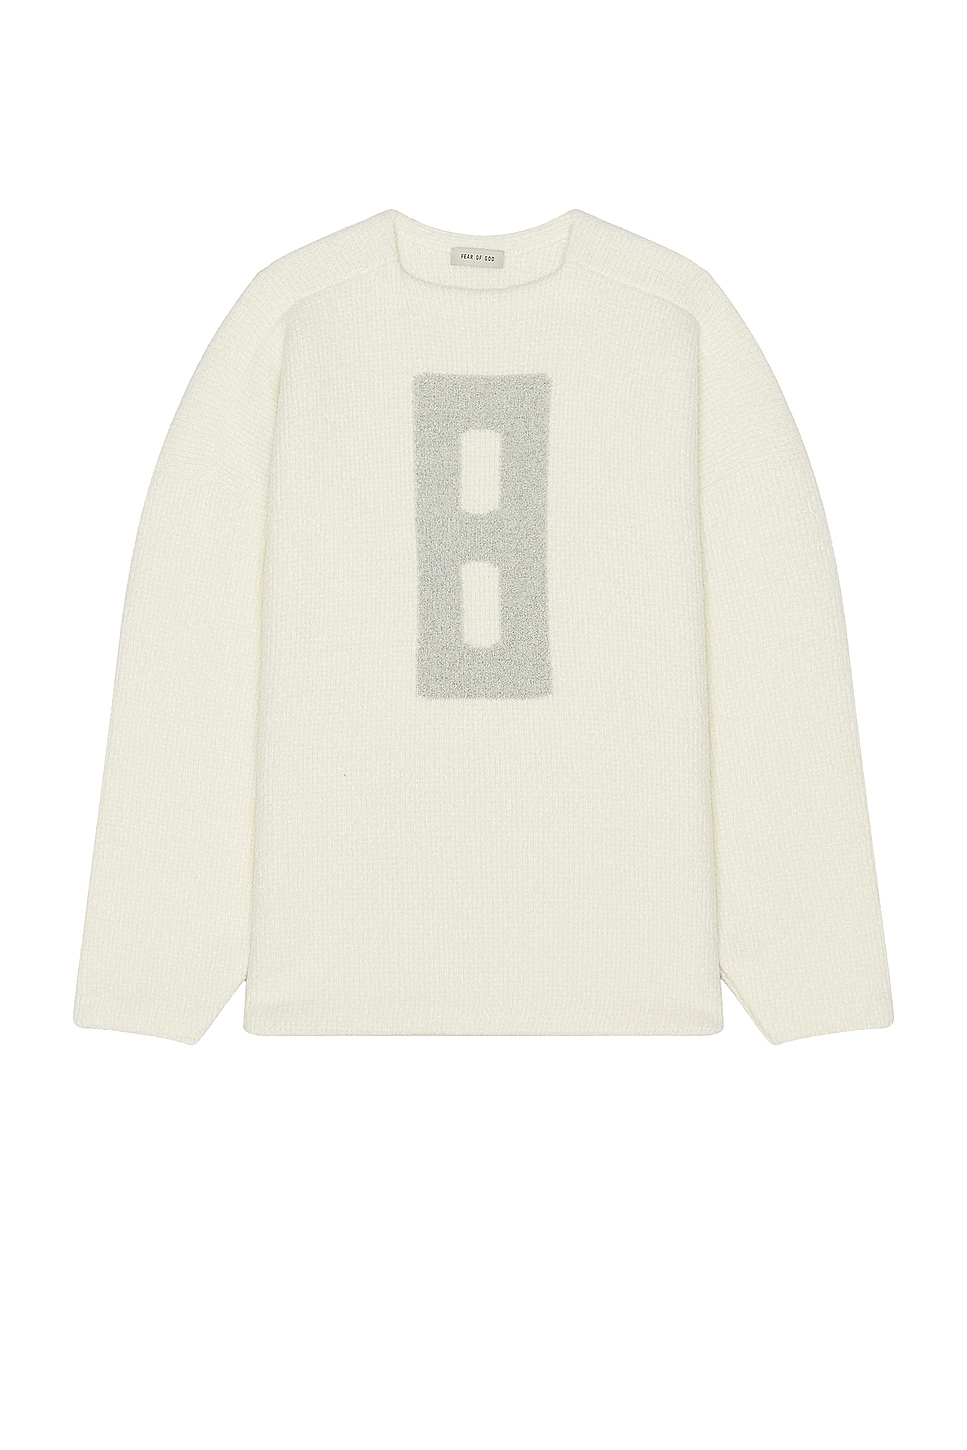 Boucle Straight Neck Relaxed Sweater in Cream